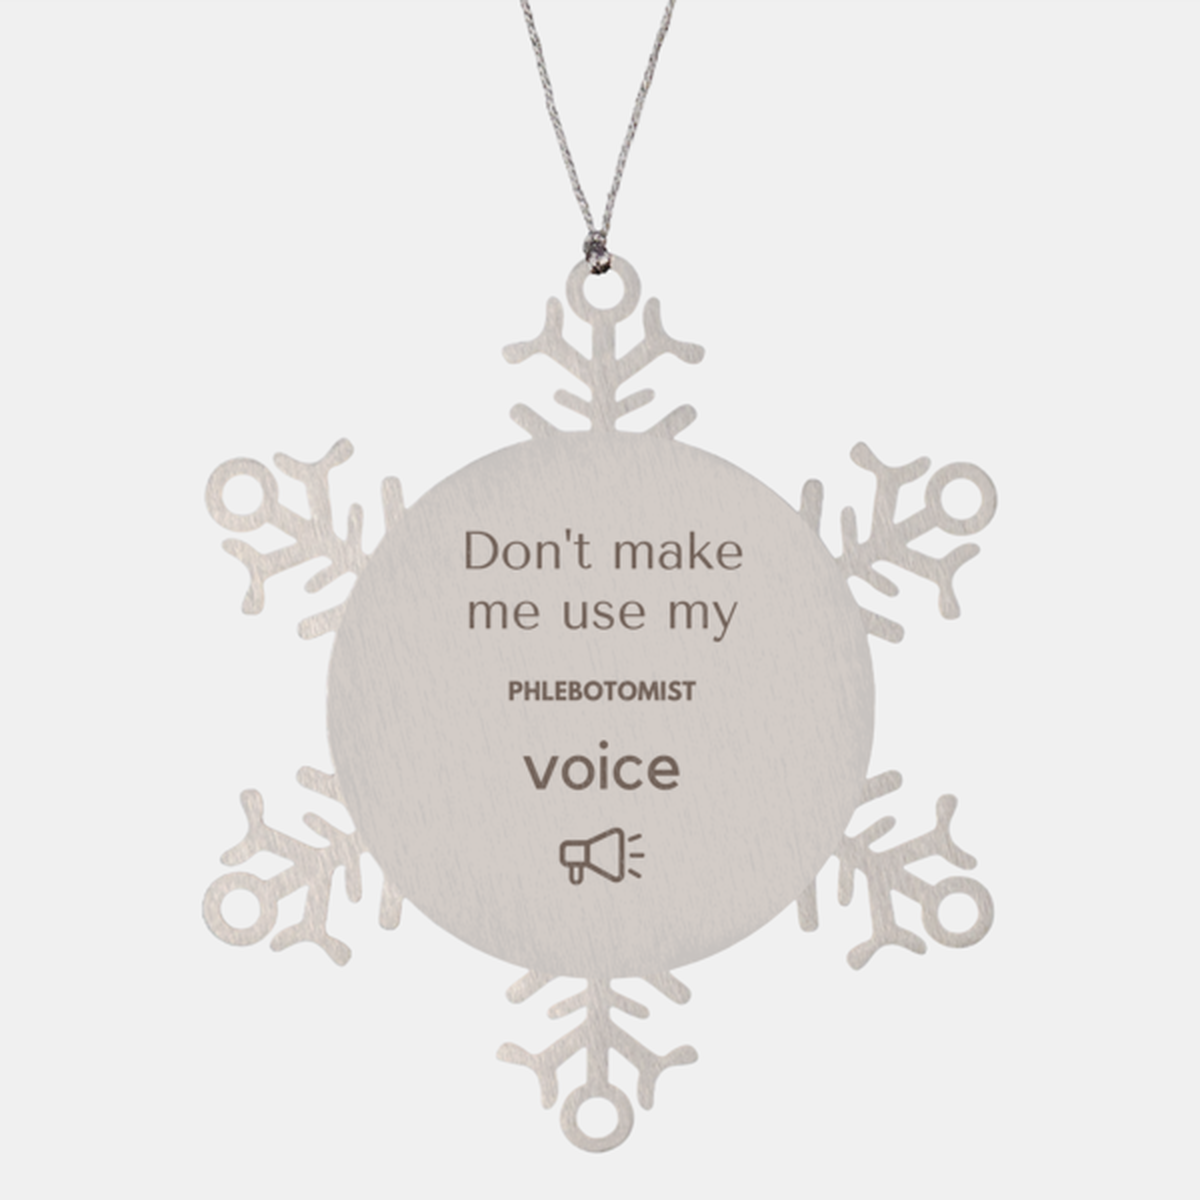 Don't make me use my Phlebotomist voice, Sarcasm Phlebotomist Ornament Gifts, Christmas Phlebotomist Snowflake Ornament Unique Gifts For Phlebotomist Coworkers, Men, Women, Colleague, Friends